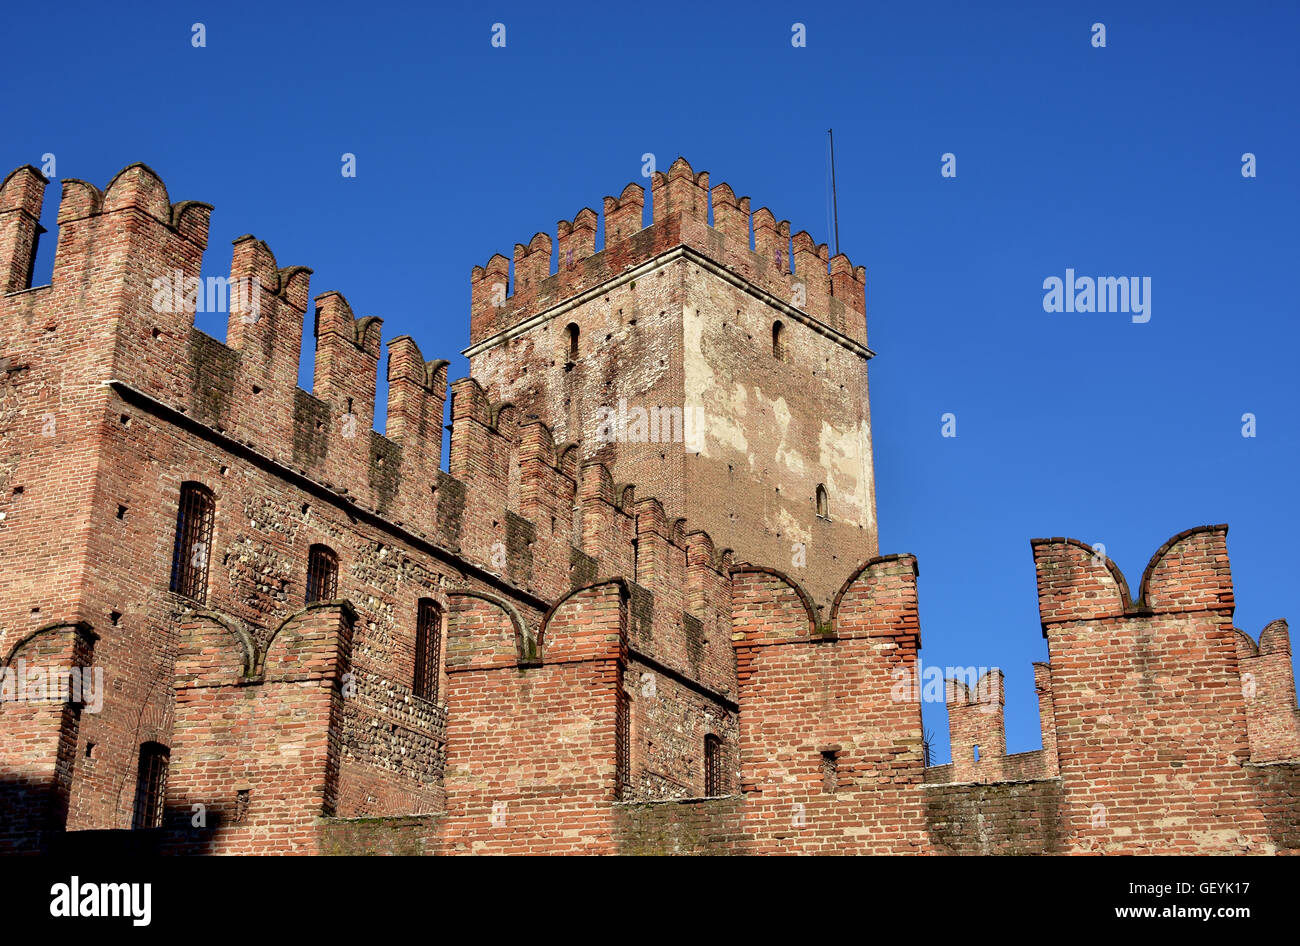 Castelvecchio (Old Castle) keep with characteristic ghibelline battlements, one of the most famous landmarks in Verona Stock Photo